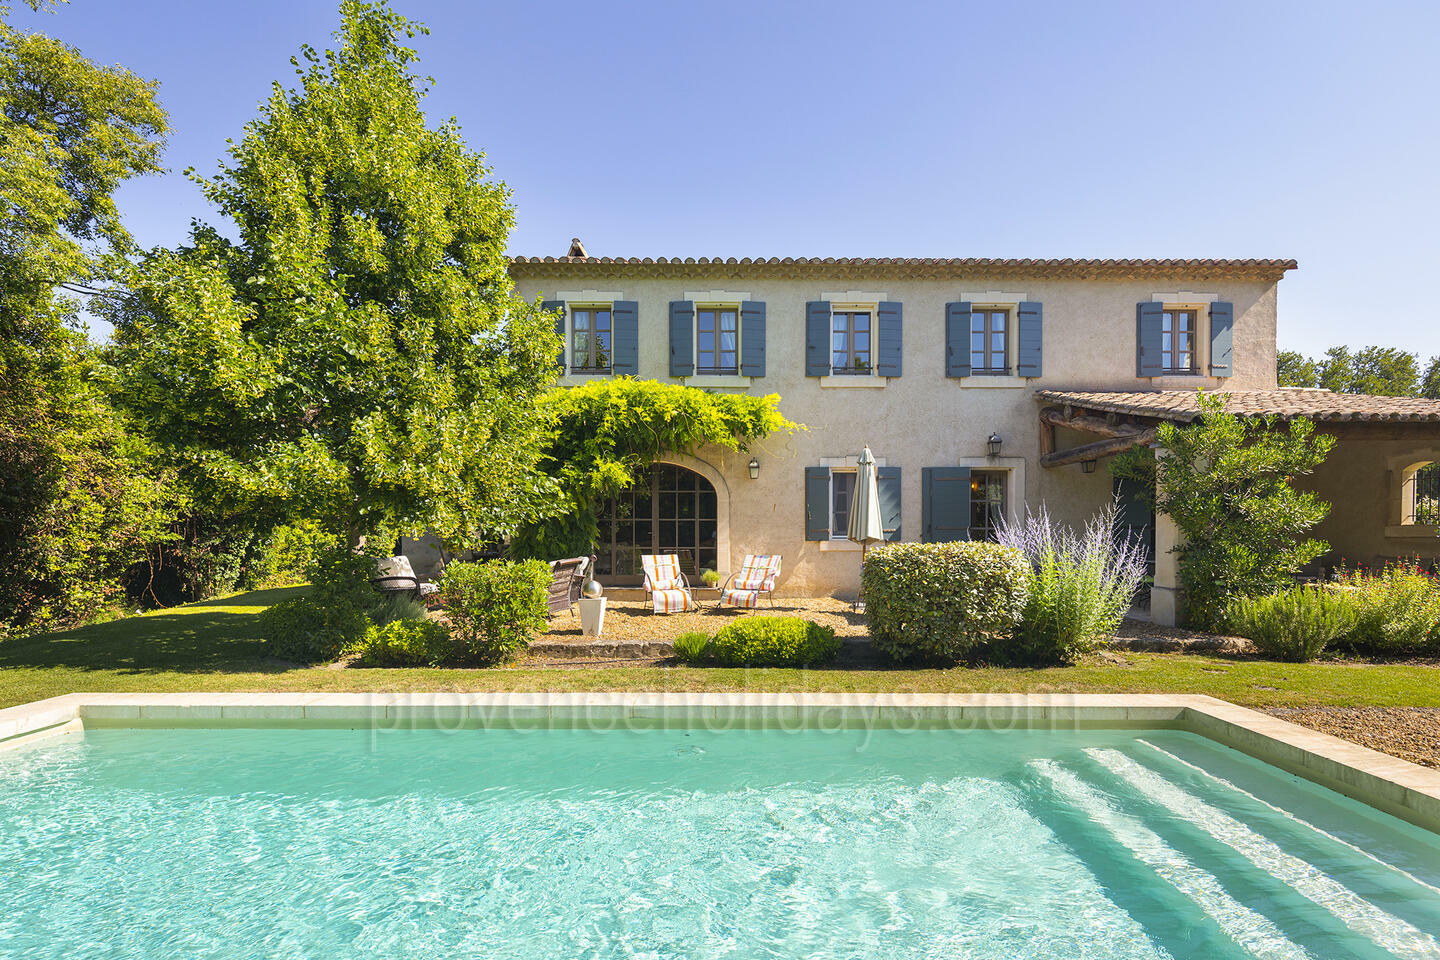 Peaceful Air-Conditioned Holiday Home in the Alpilles 1 - Maison des Oliviers: Villa: Pool